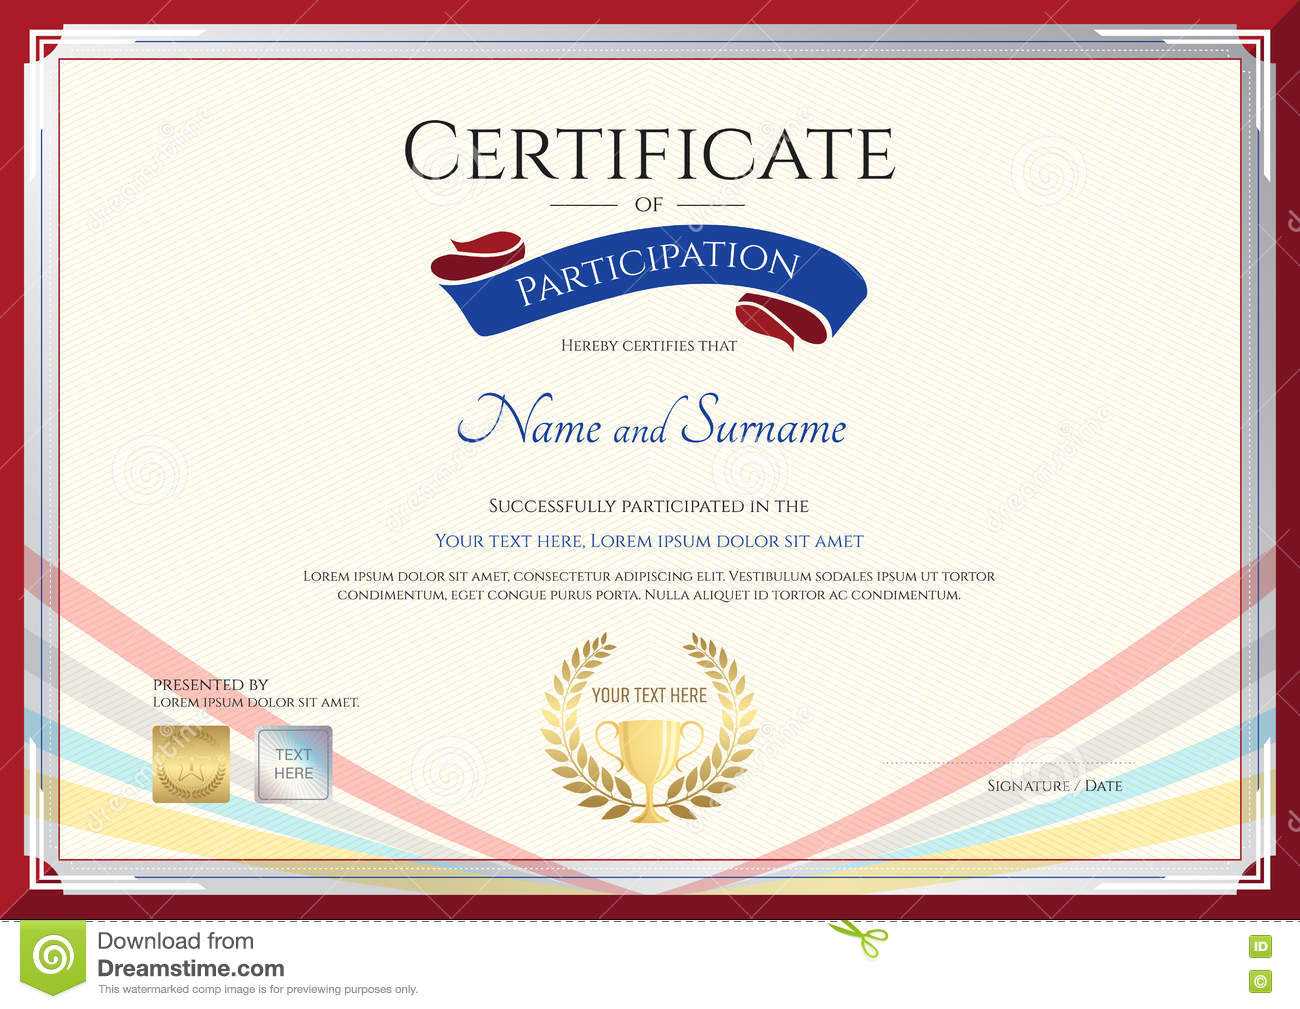 Certificate Template For Achievement, Appreciation Or With Conference Participation Certificate Template